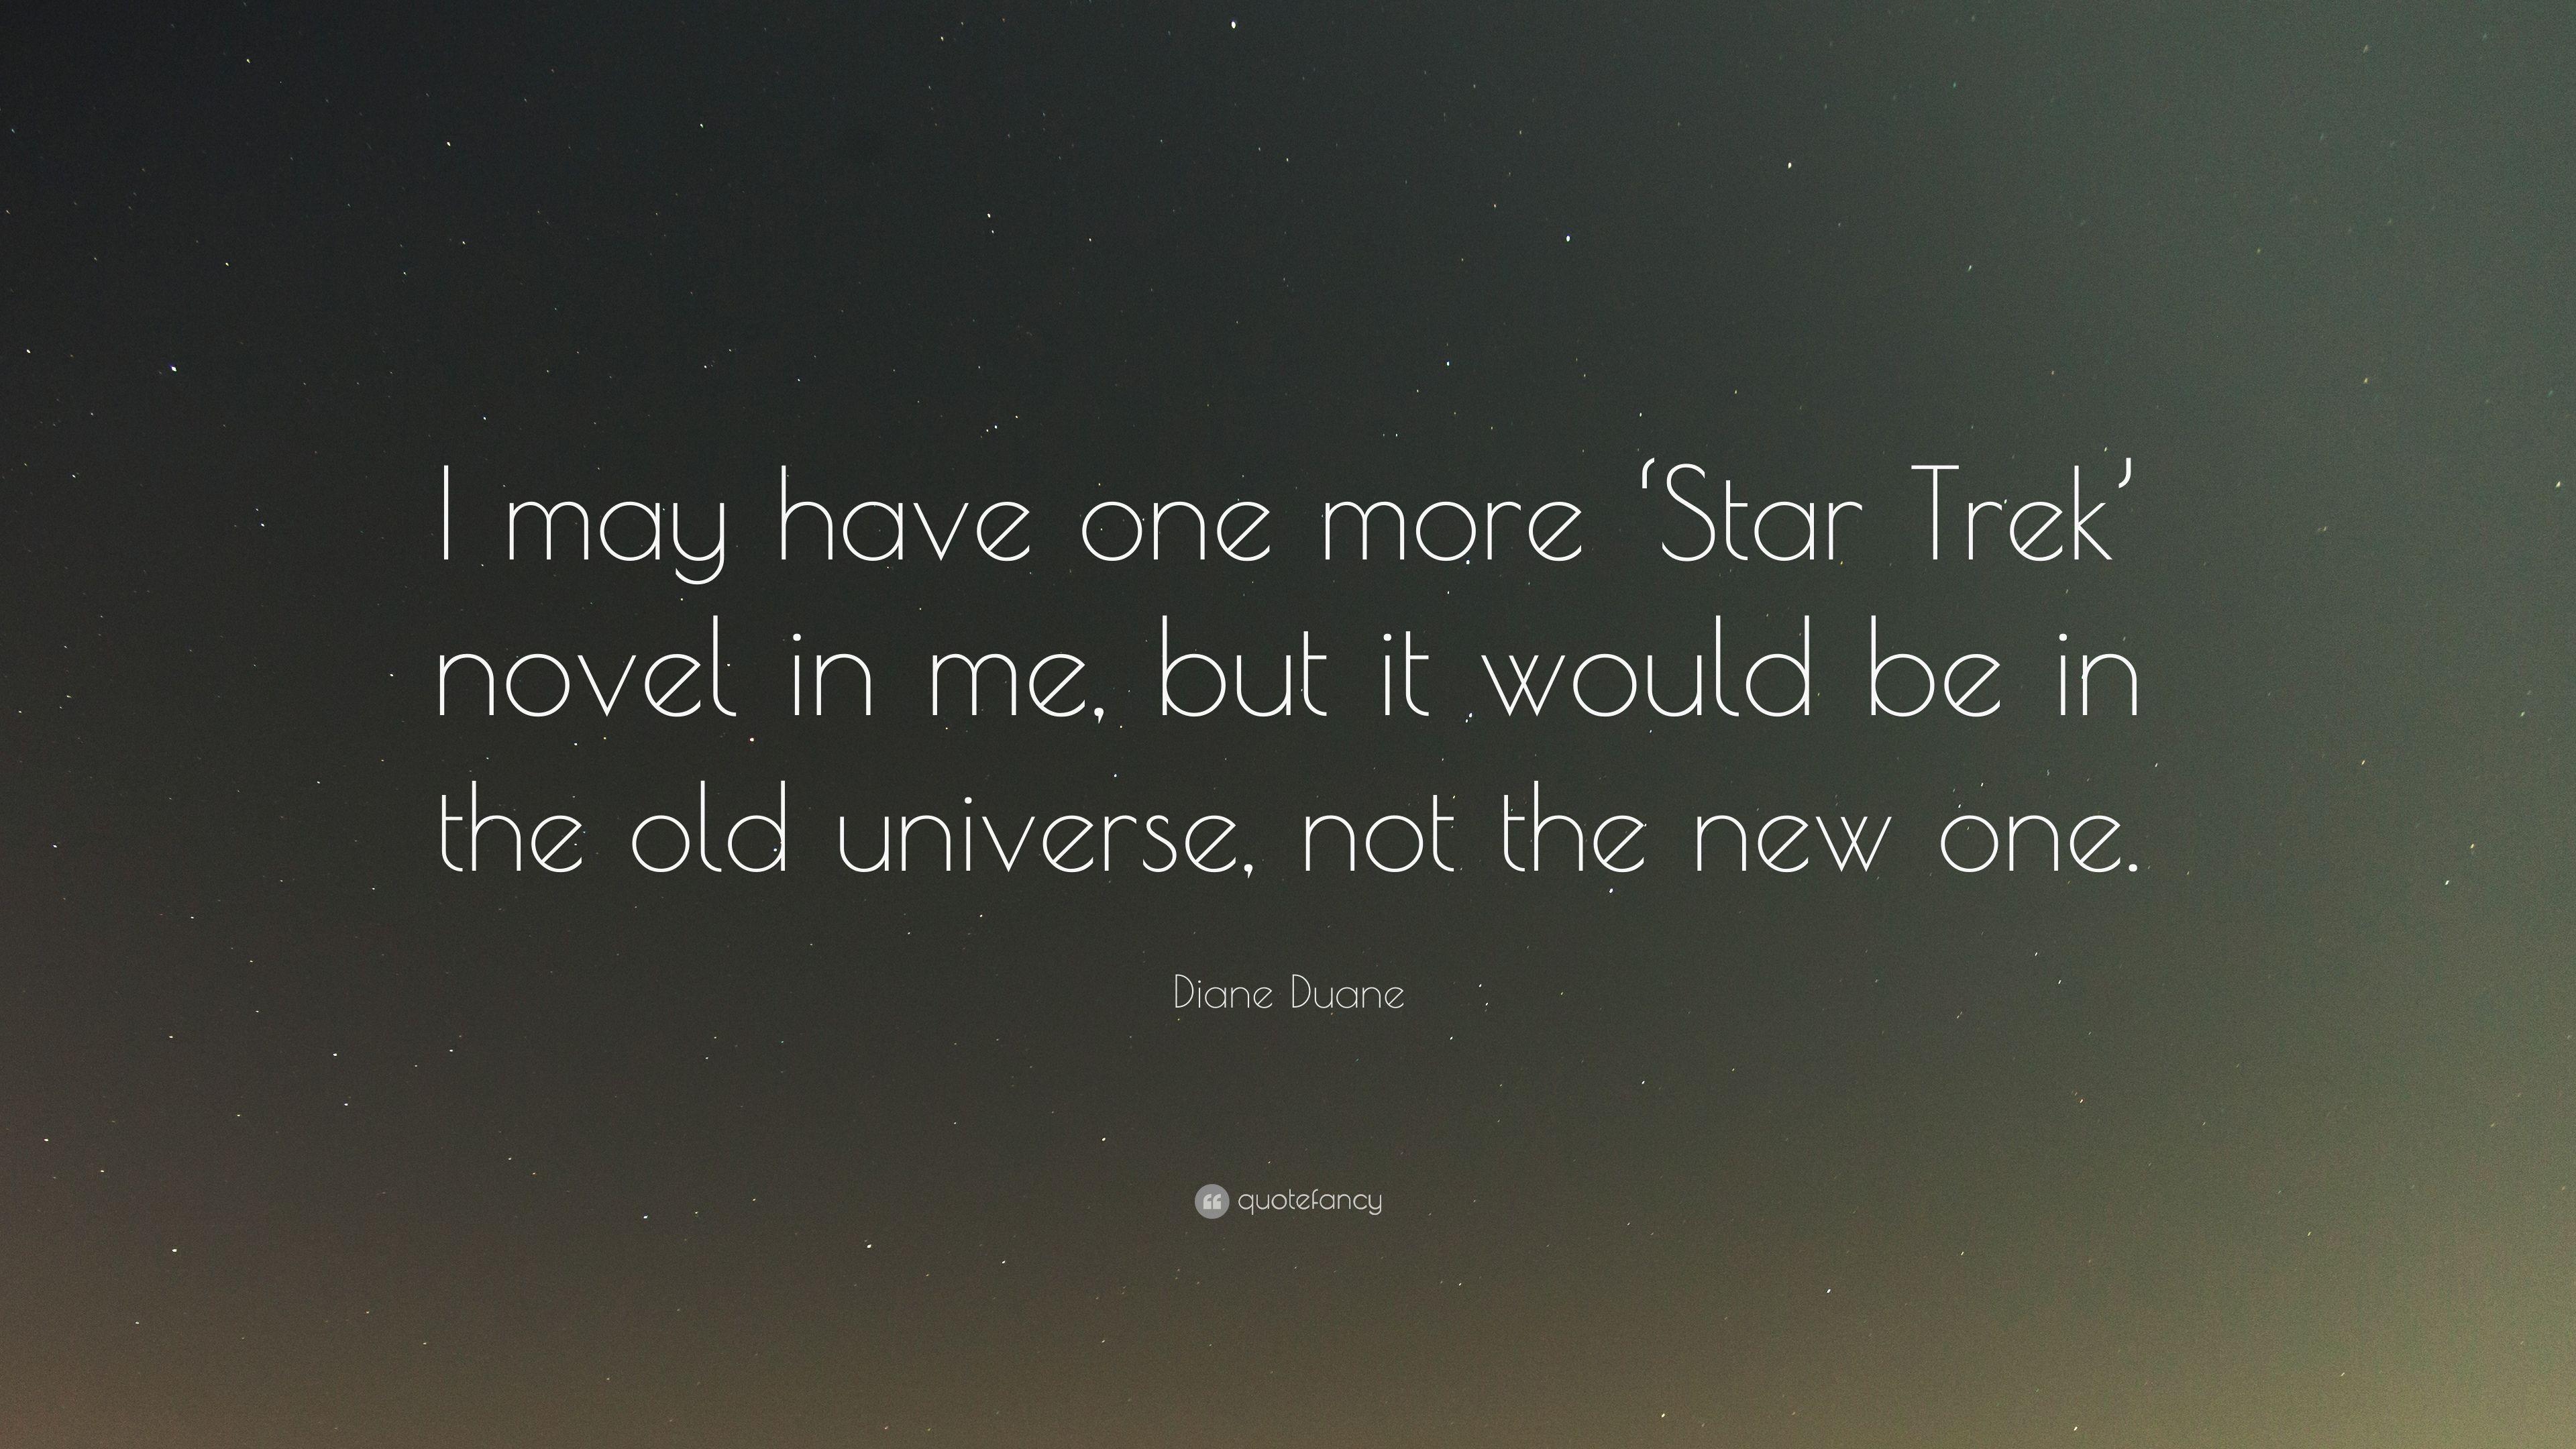 Diane Duane Quote: “I may have one more 'Star Trek' novel in me, but